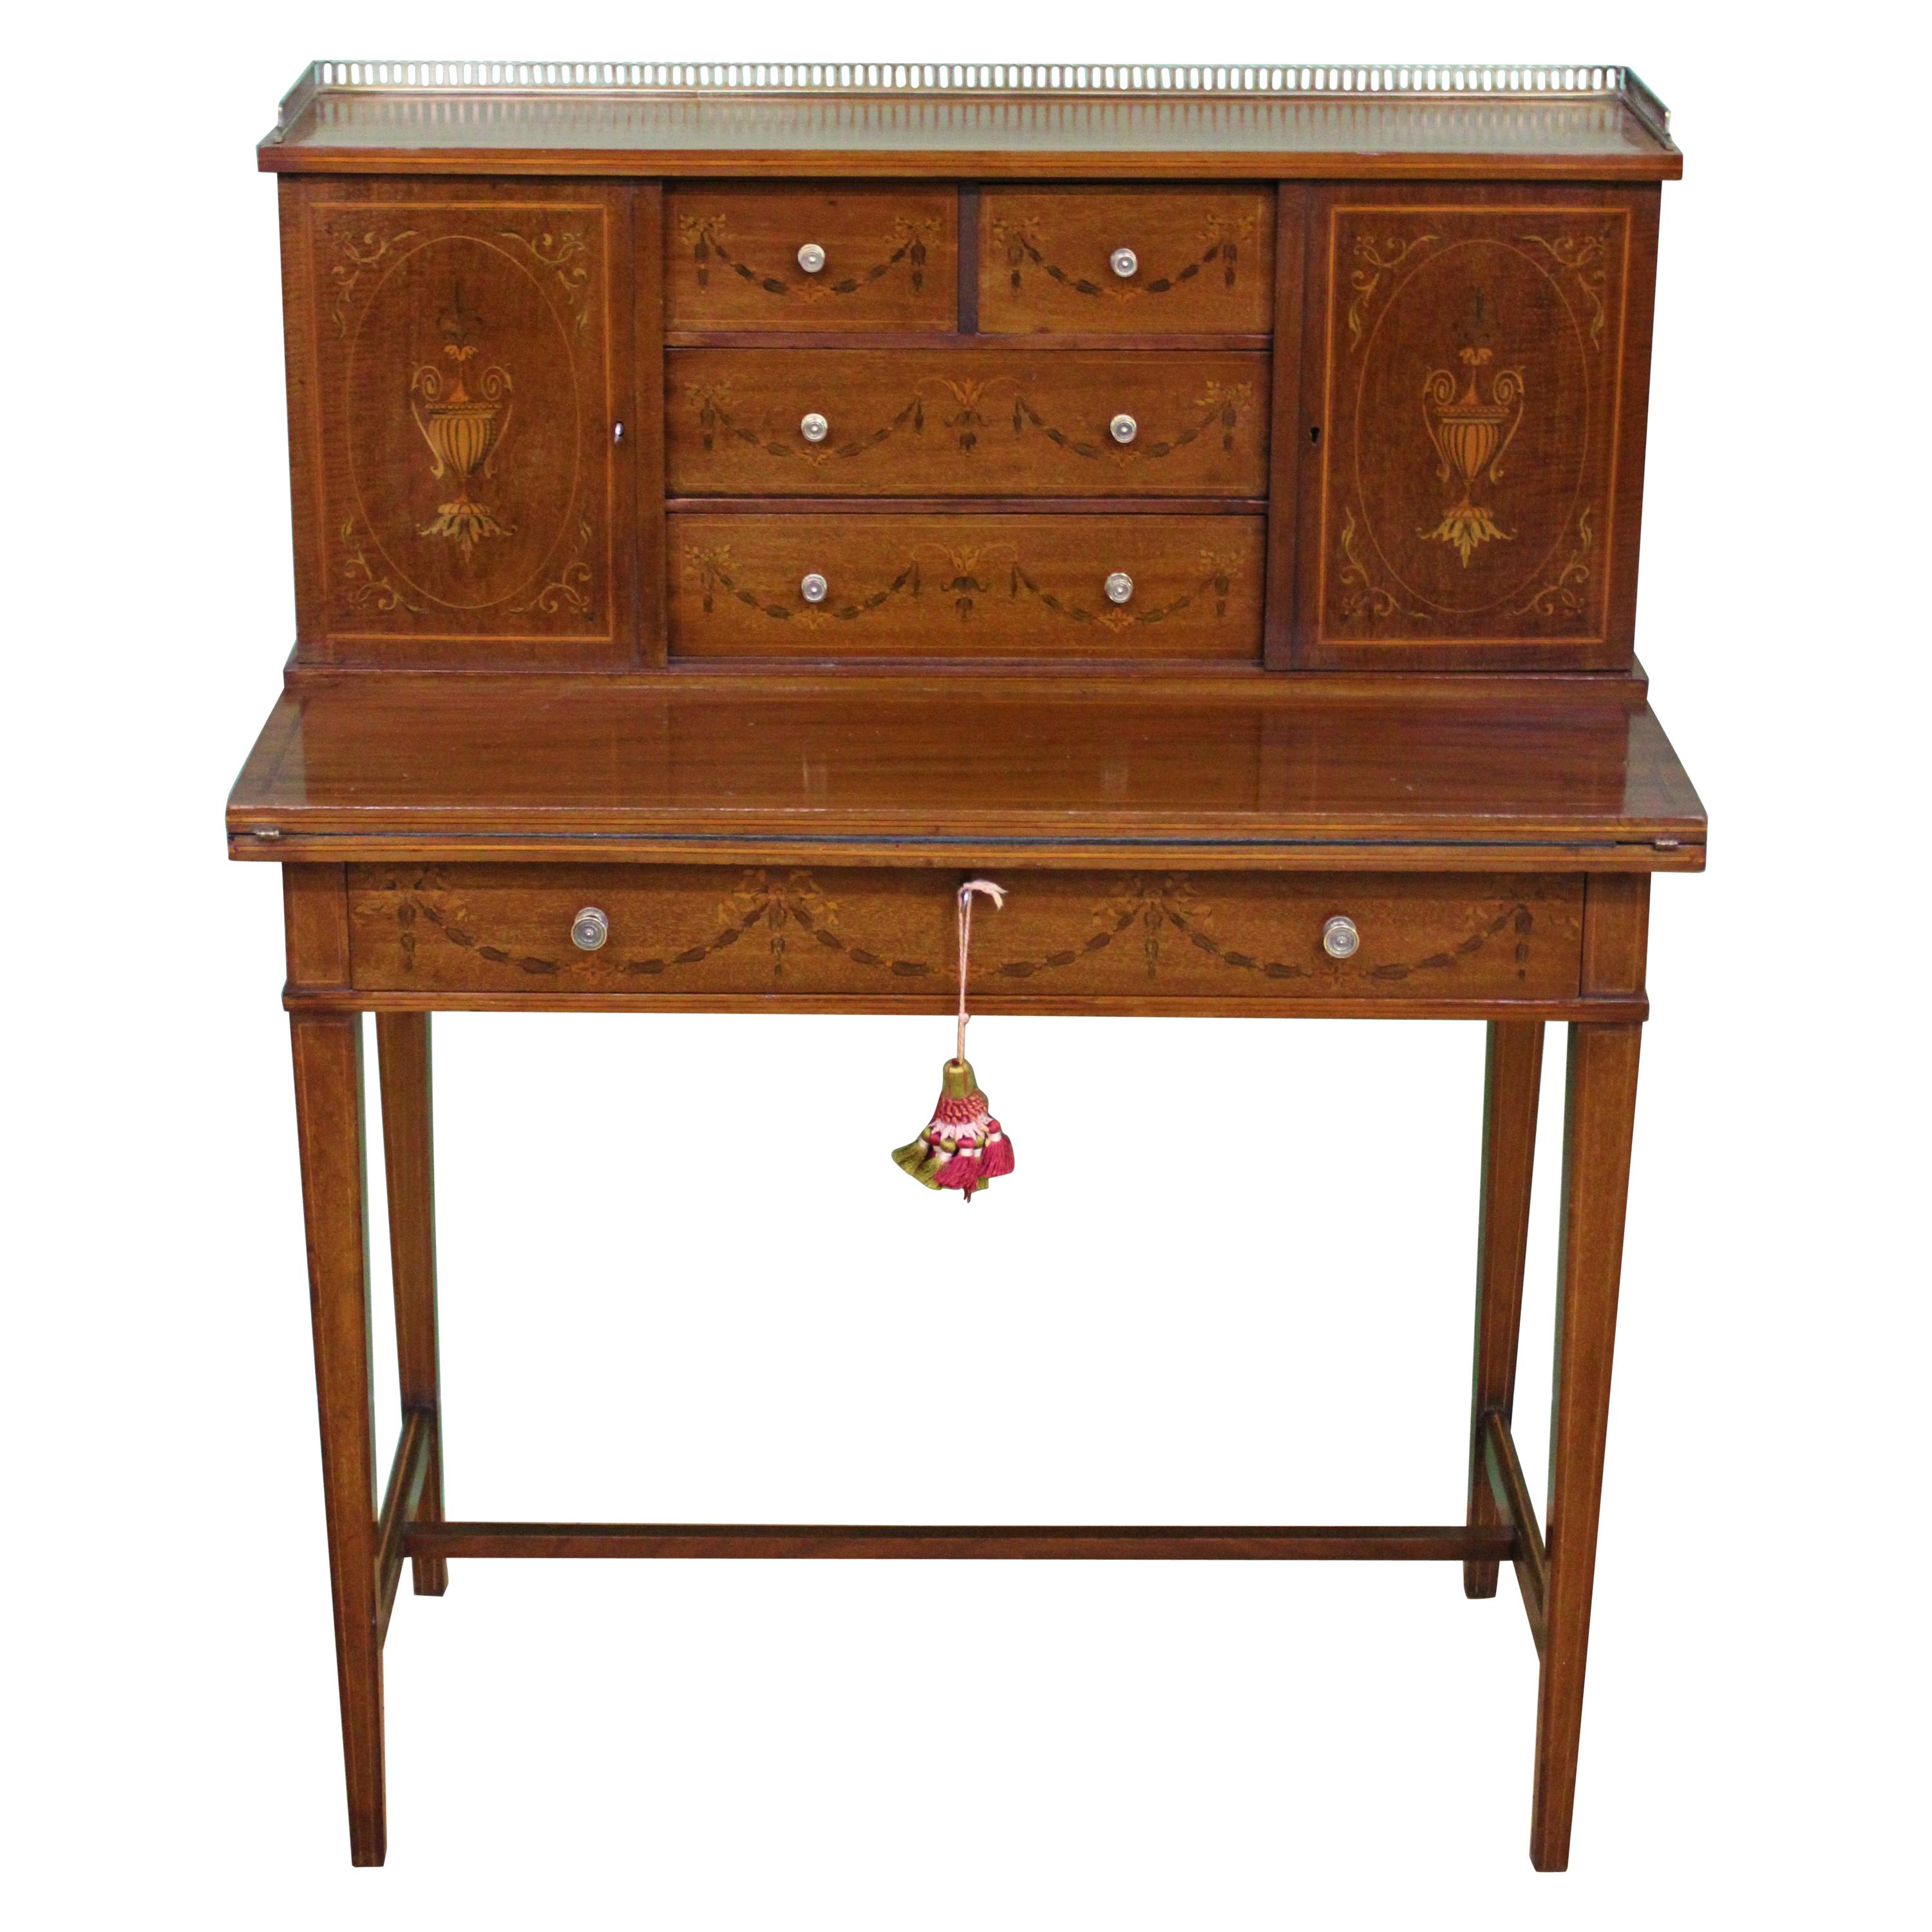 Late 19th Century Inlaid Mahogany Bonheur Du Jour by Jas Shoolbred & Co. For Sale